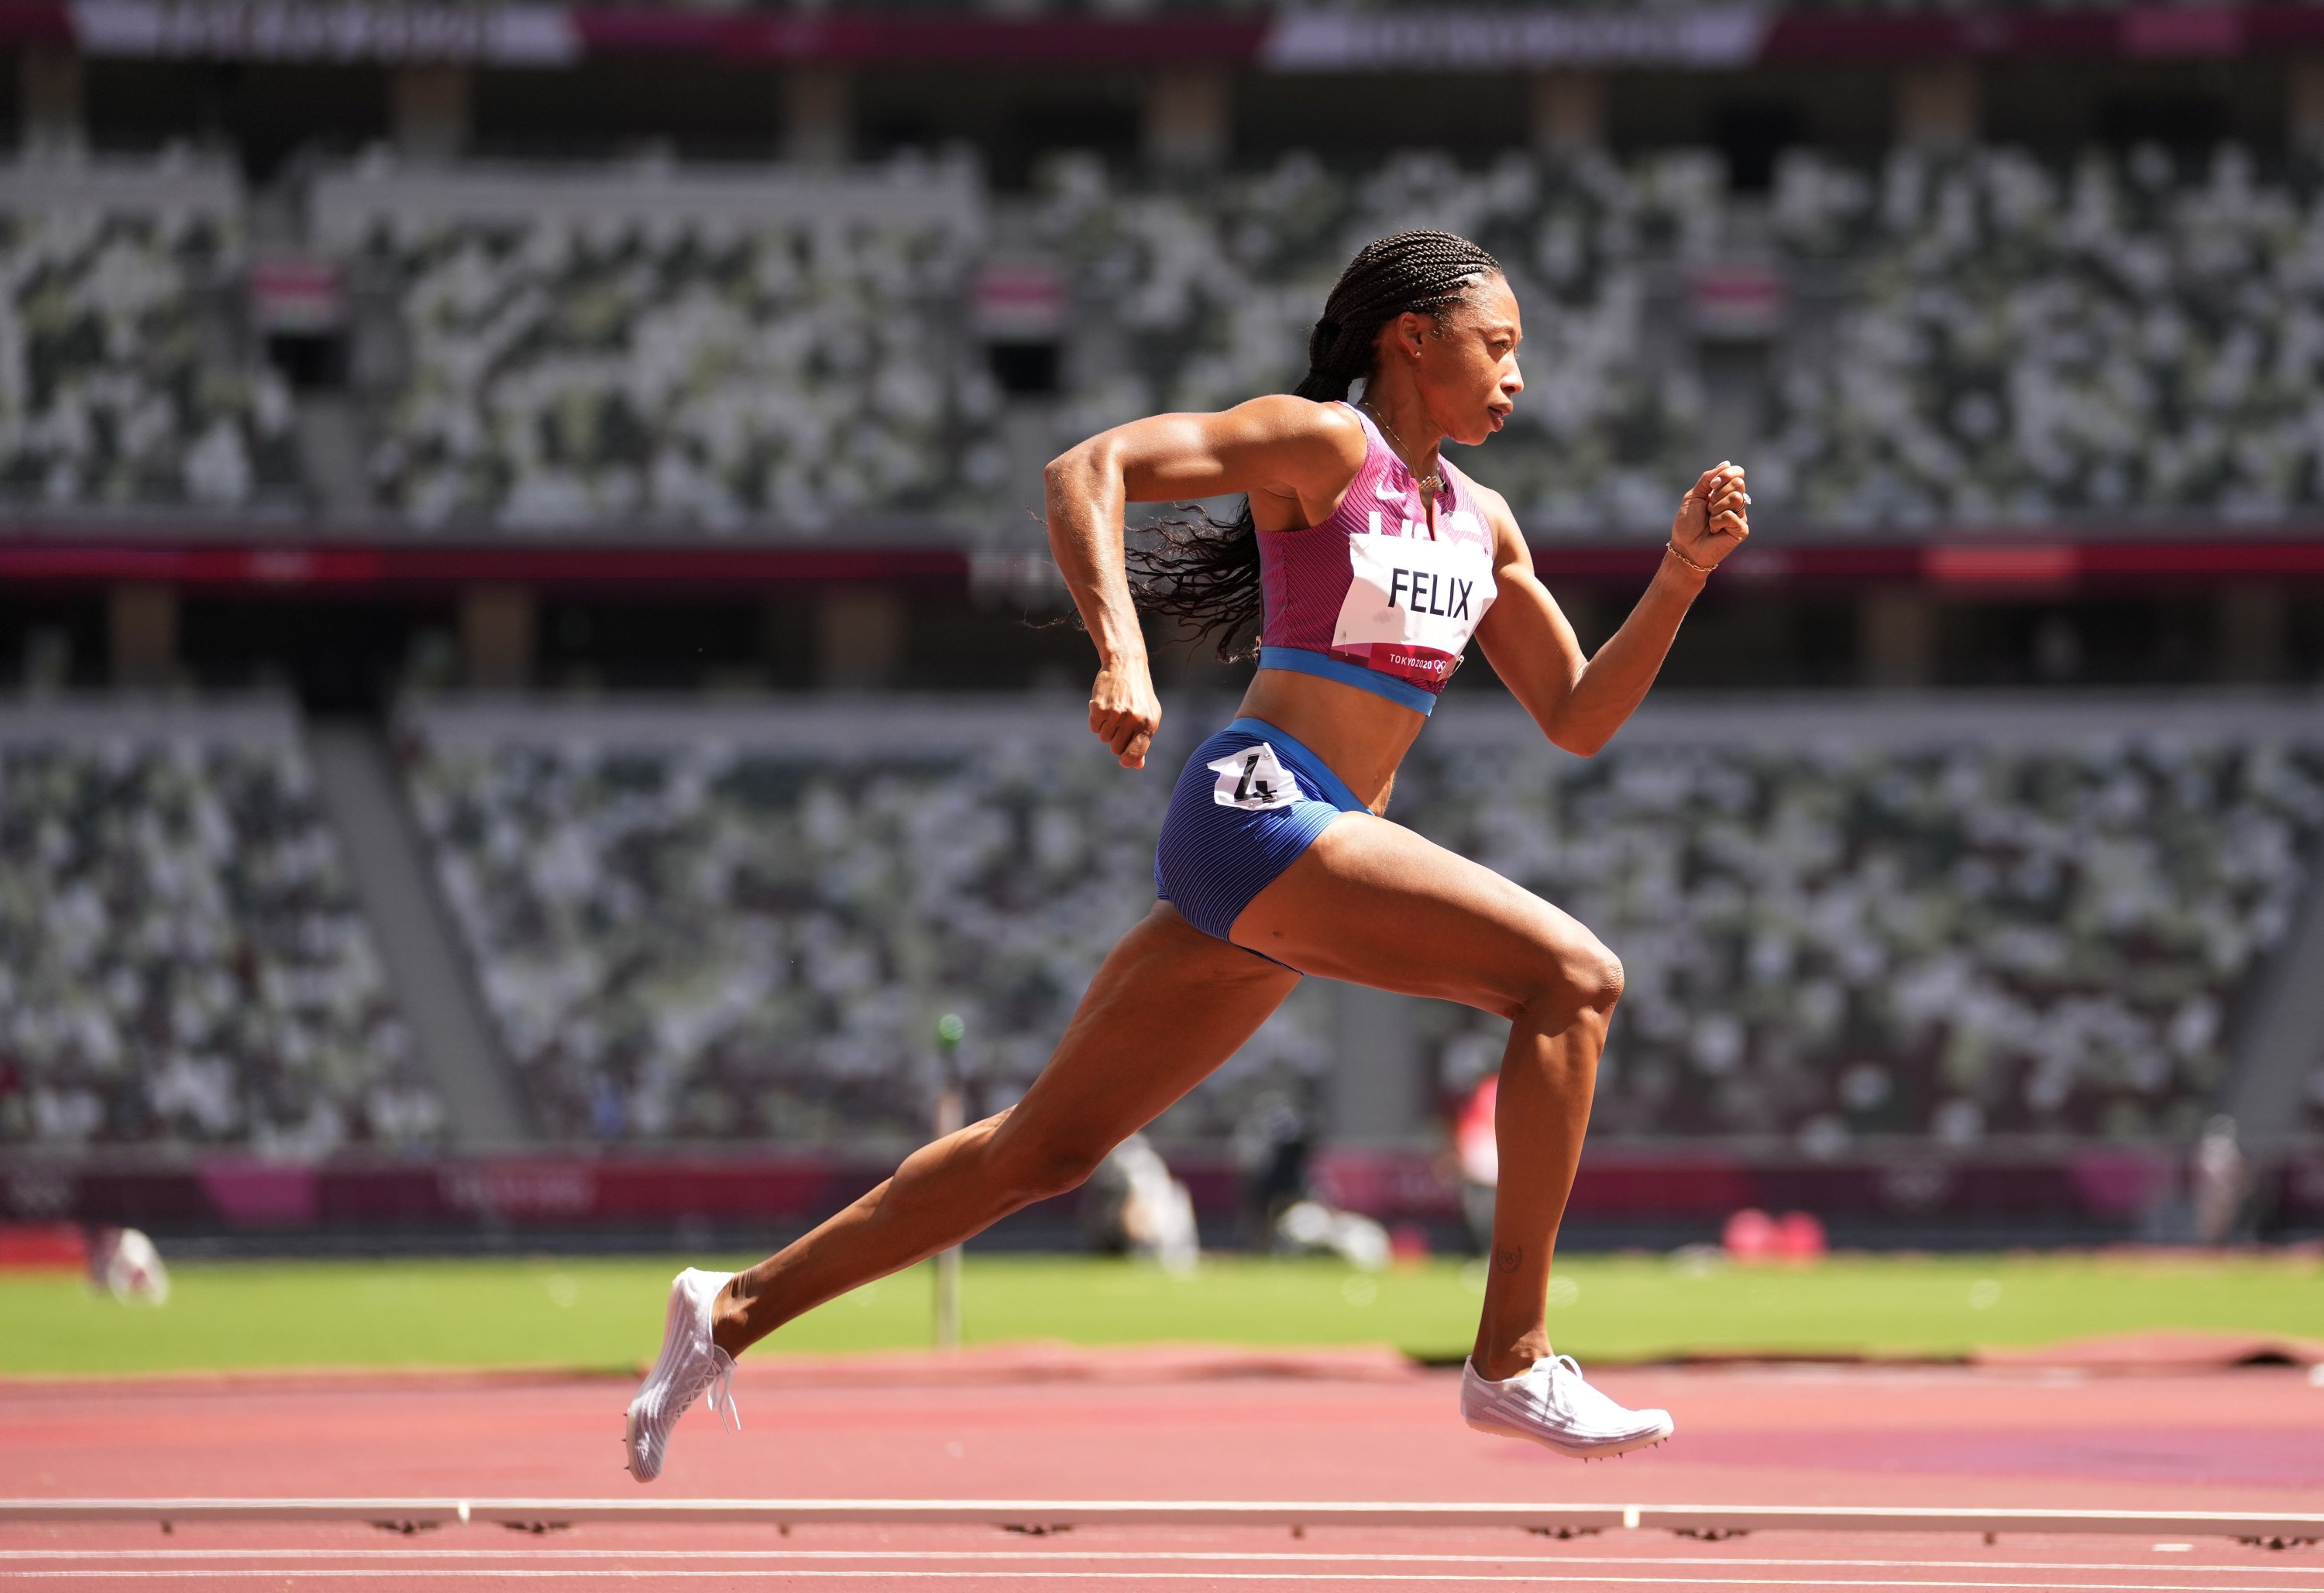 Allyson Felix of the United States races in a women's 400-meter heat at the 2020 Summer Olympics, Tokyo, Japan, Aug. 3, 2021. (AP Photo)